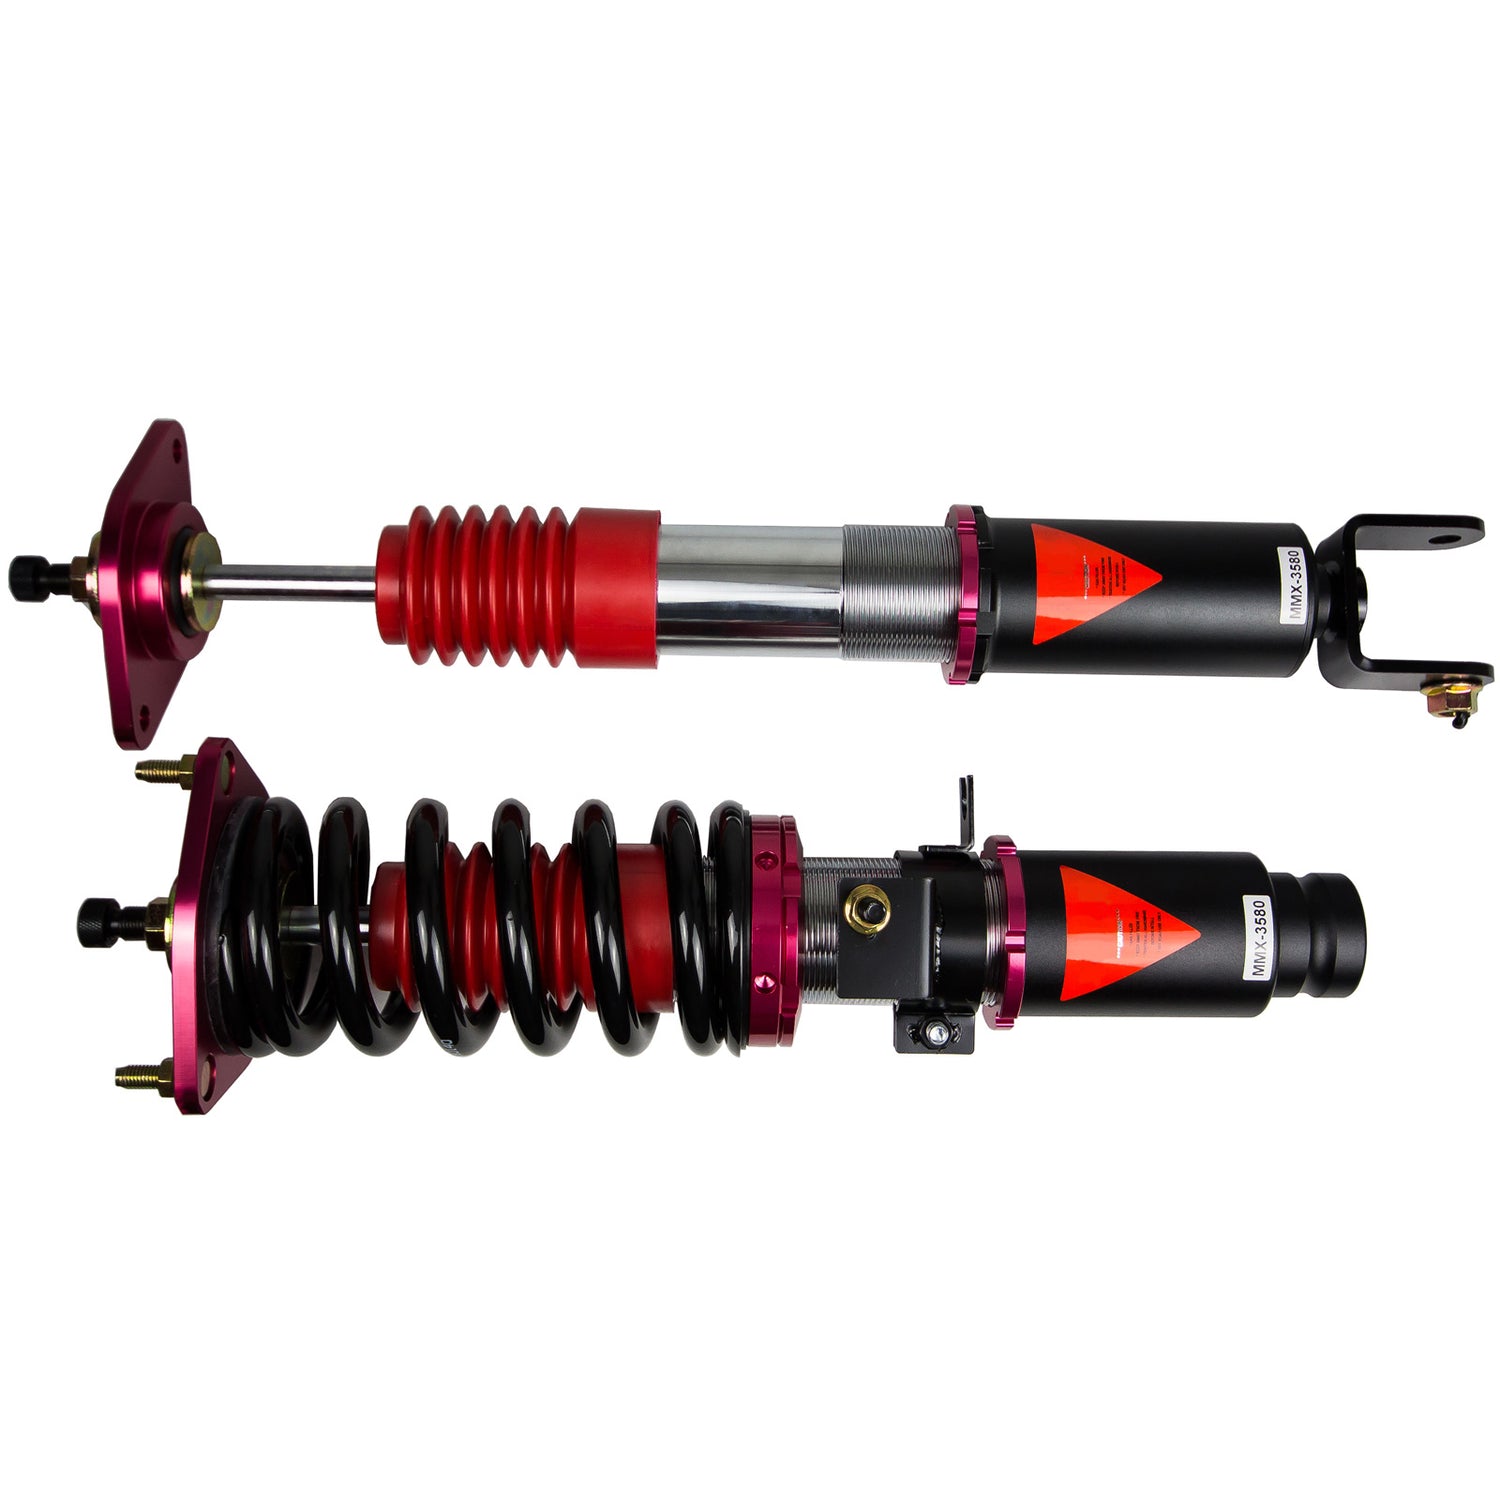 MMX3580 MAXX Coilovers Lowering Kit, Fully Adjustable, Ride Height, 40 Clicks Rebound Settings, Infiniti G35 X(V35) 04-06(AWD)